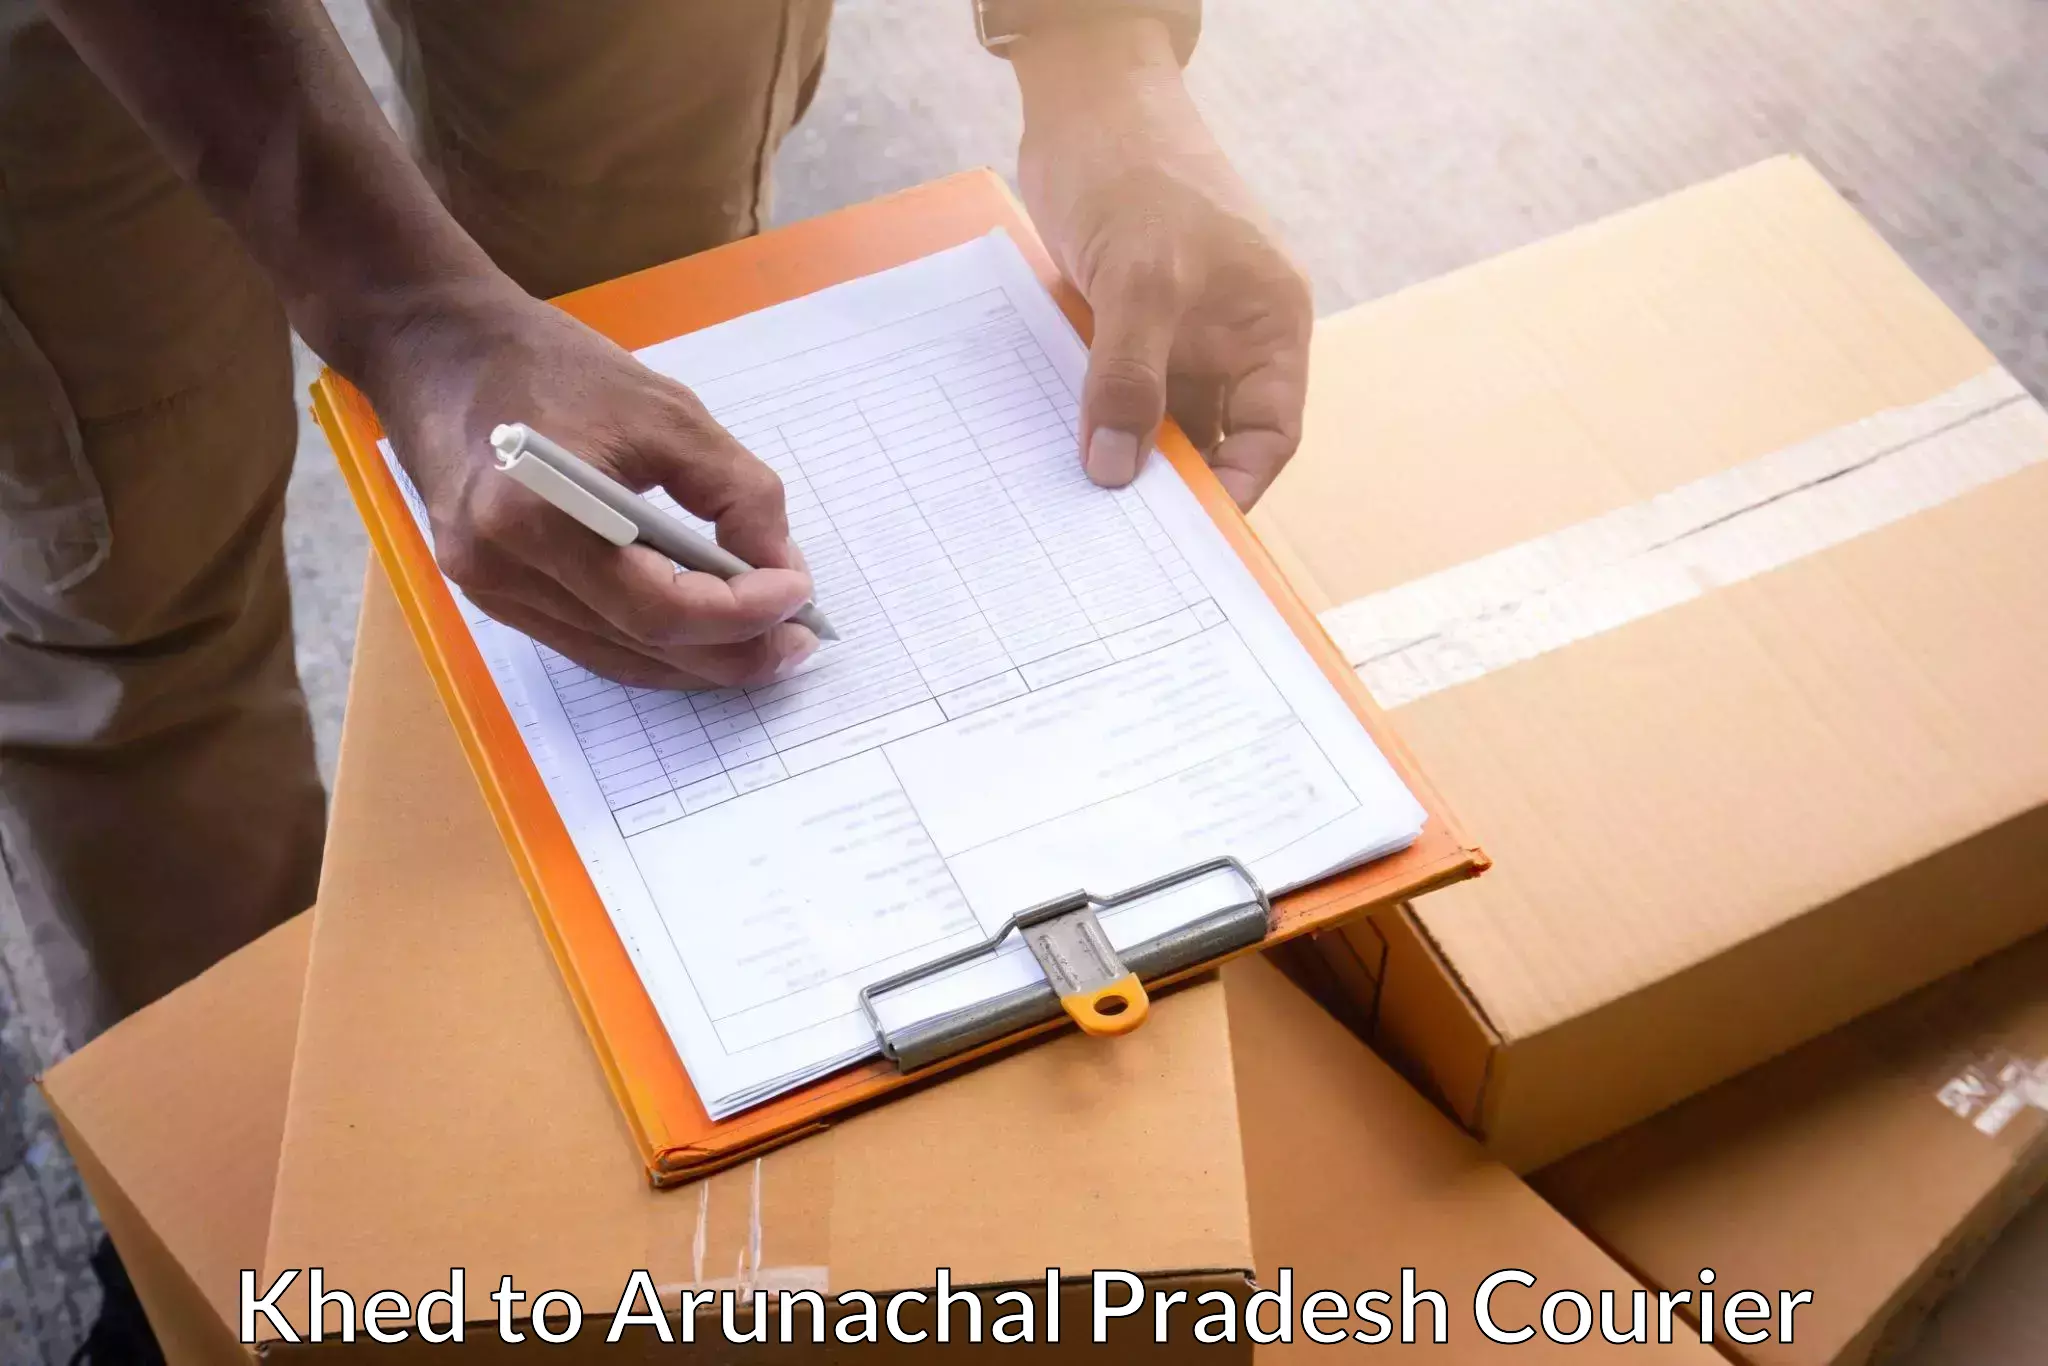 Efficient order fulfillment Khed to Aalo